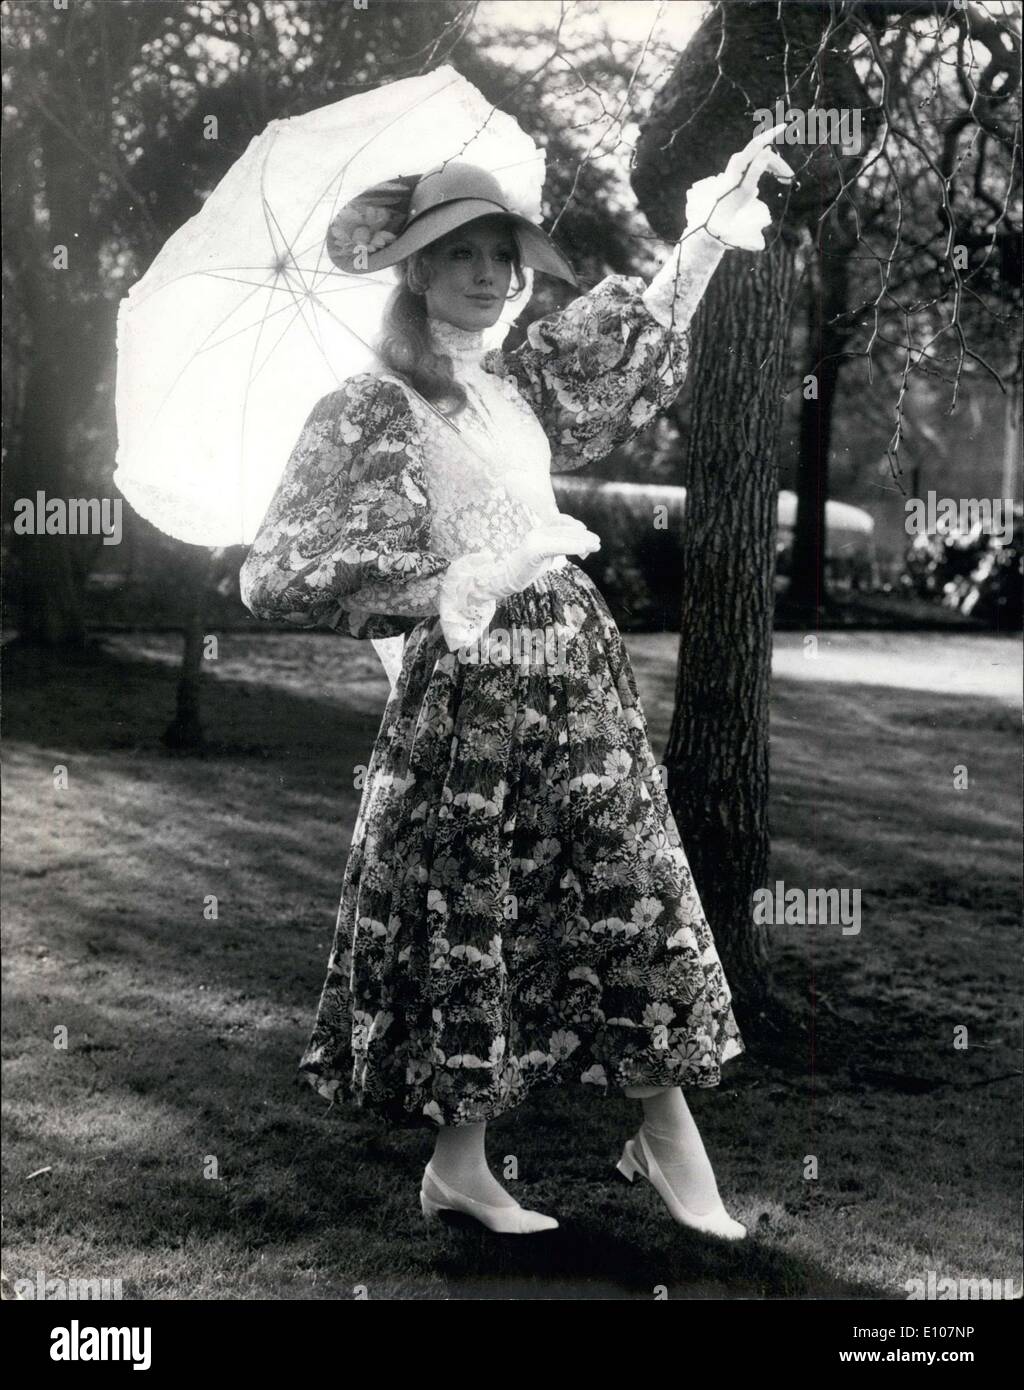 Feb. 09, 1970 - Fashions for the Spring and Summer:There was a Press preview today of Louette Whitby's spring and summer haute couture collection.Photo shows Ilona Johnson seen wearing ''Royal Ascot'' - a dress of cotton voite with a cotton white lace front and leg-o-mutton sleeves - worn with a large brown hat with sun flowers, and a white parasol. Stock Photo